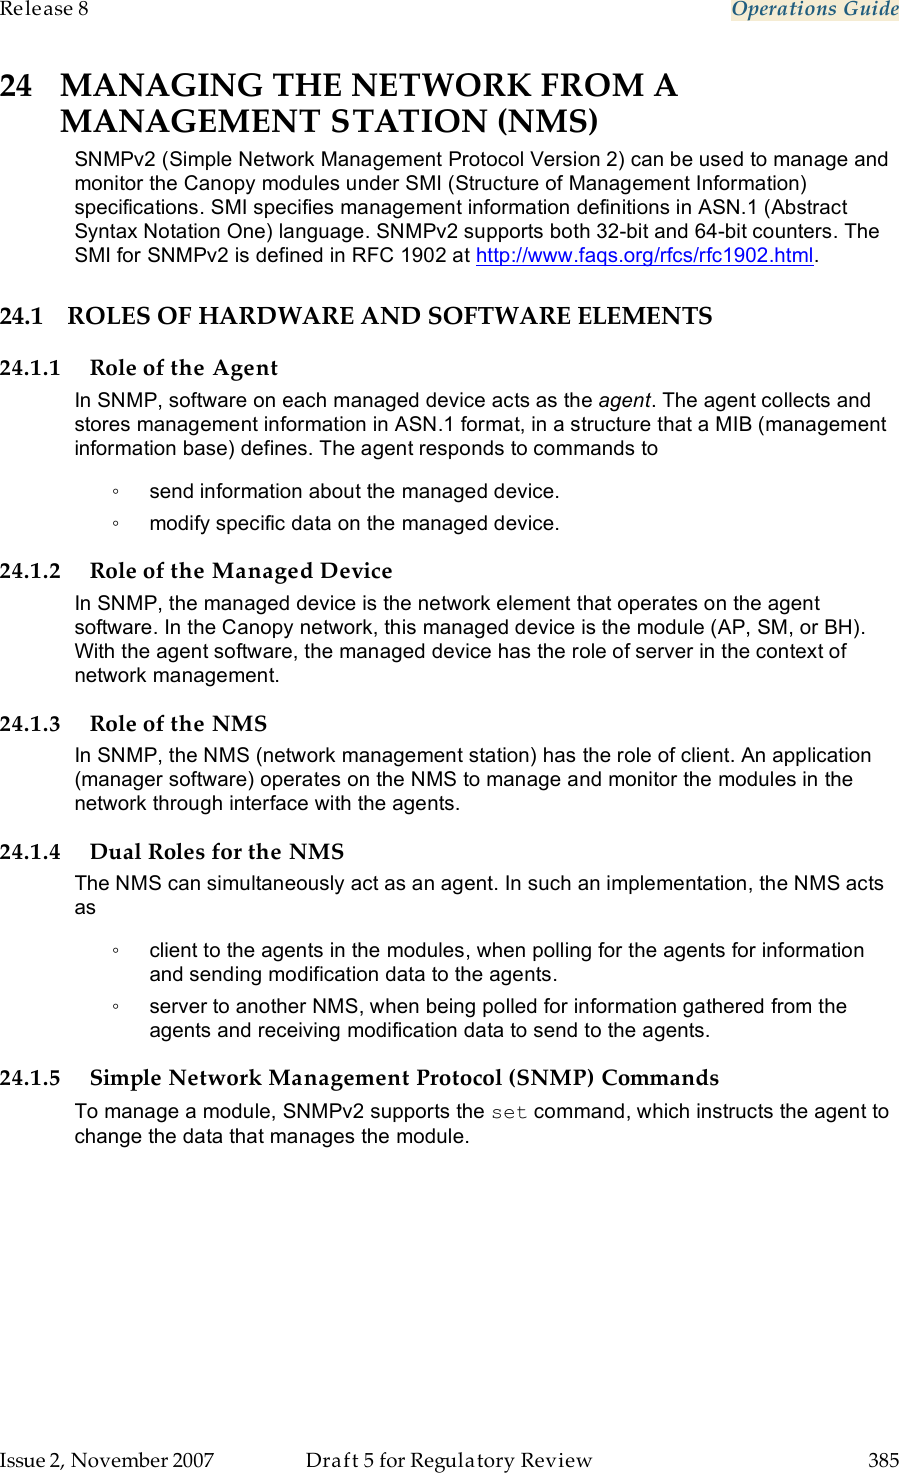 Release 8    Operations Guide   Issue 2, November 2007  Draft 5 for Regulatory Review  385     24 MANAGING THE NETWORK FROM A MANAGEMENT STATION (NMS) SNMPv2 (Simple Network Management Protocol Version 2) can be used to manage and monitor the Canopy modules under SMI (Structure of Management Information) specifications. SMI specifies management information definitions in ASN.1 (Abstract Syntax Notation One) language. SNMPv2 supports both 32-bit and 64-bit counters. The SMI for SNMPv2 is defined in RFC 1902 at http://www.faqs.org/rfcs/rfc1902.html. 24.1 ROLES OF HARDWARE AND SOFTWARE ELEMENTS 24.1.1 Role of the Agent In SNMP, software on each managed device acts as the agent. The agent collects and stores management information in ASN.1 format, in a structure that a MIB (management information base) defines. The agent responds to commands to  ◦  send information about the managed device. ◦  modify specific data on the managed device. 24.1.2 Role of the Managed Device In SNMP, the managed device is the network element that operates on the agent software. In the Canopy network, this managed device is the module (AP, SM, or BH). With the agent software, the managed device has the role of server in the context of network management.  24.1.3 Role of the NMS In SNMP, the NMS (network management station) has the role of client. An application (manager software) operates on the NMS to manage and monitor the modules in the network through interface with the agents. 24.1.4 Dual Roles for the NMS The NMS can simultaneously act as an agent. In such an implementation, the NMS acts as  ◦  client to the agents in the modules, when polling for the agents for information and sending modification data to the agents.  ◦  server to another NMS, when being polled for information gathered from the agents and receiving modification data to send to the agents.  24.1.5 Simple Network Management Protocol (SNMP) Commands To manage a module, SNMPv2 supports the set command, which instructs the agent to change the data that manages the module. 